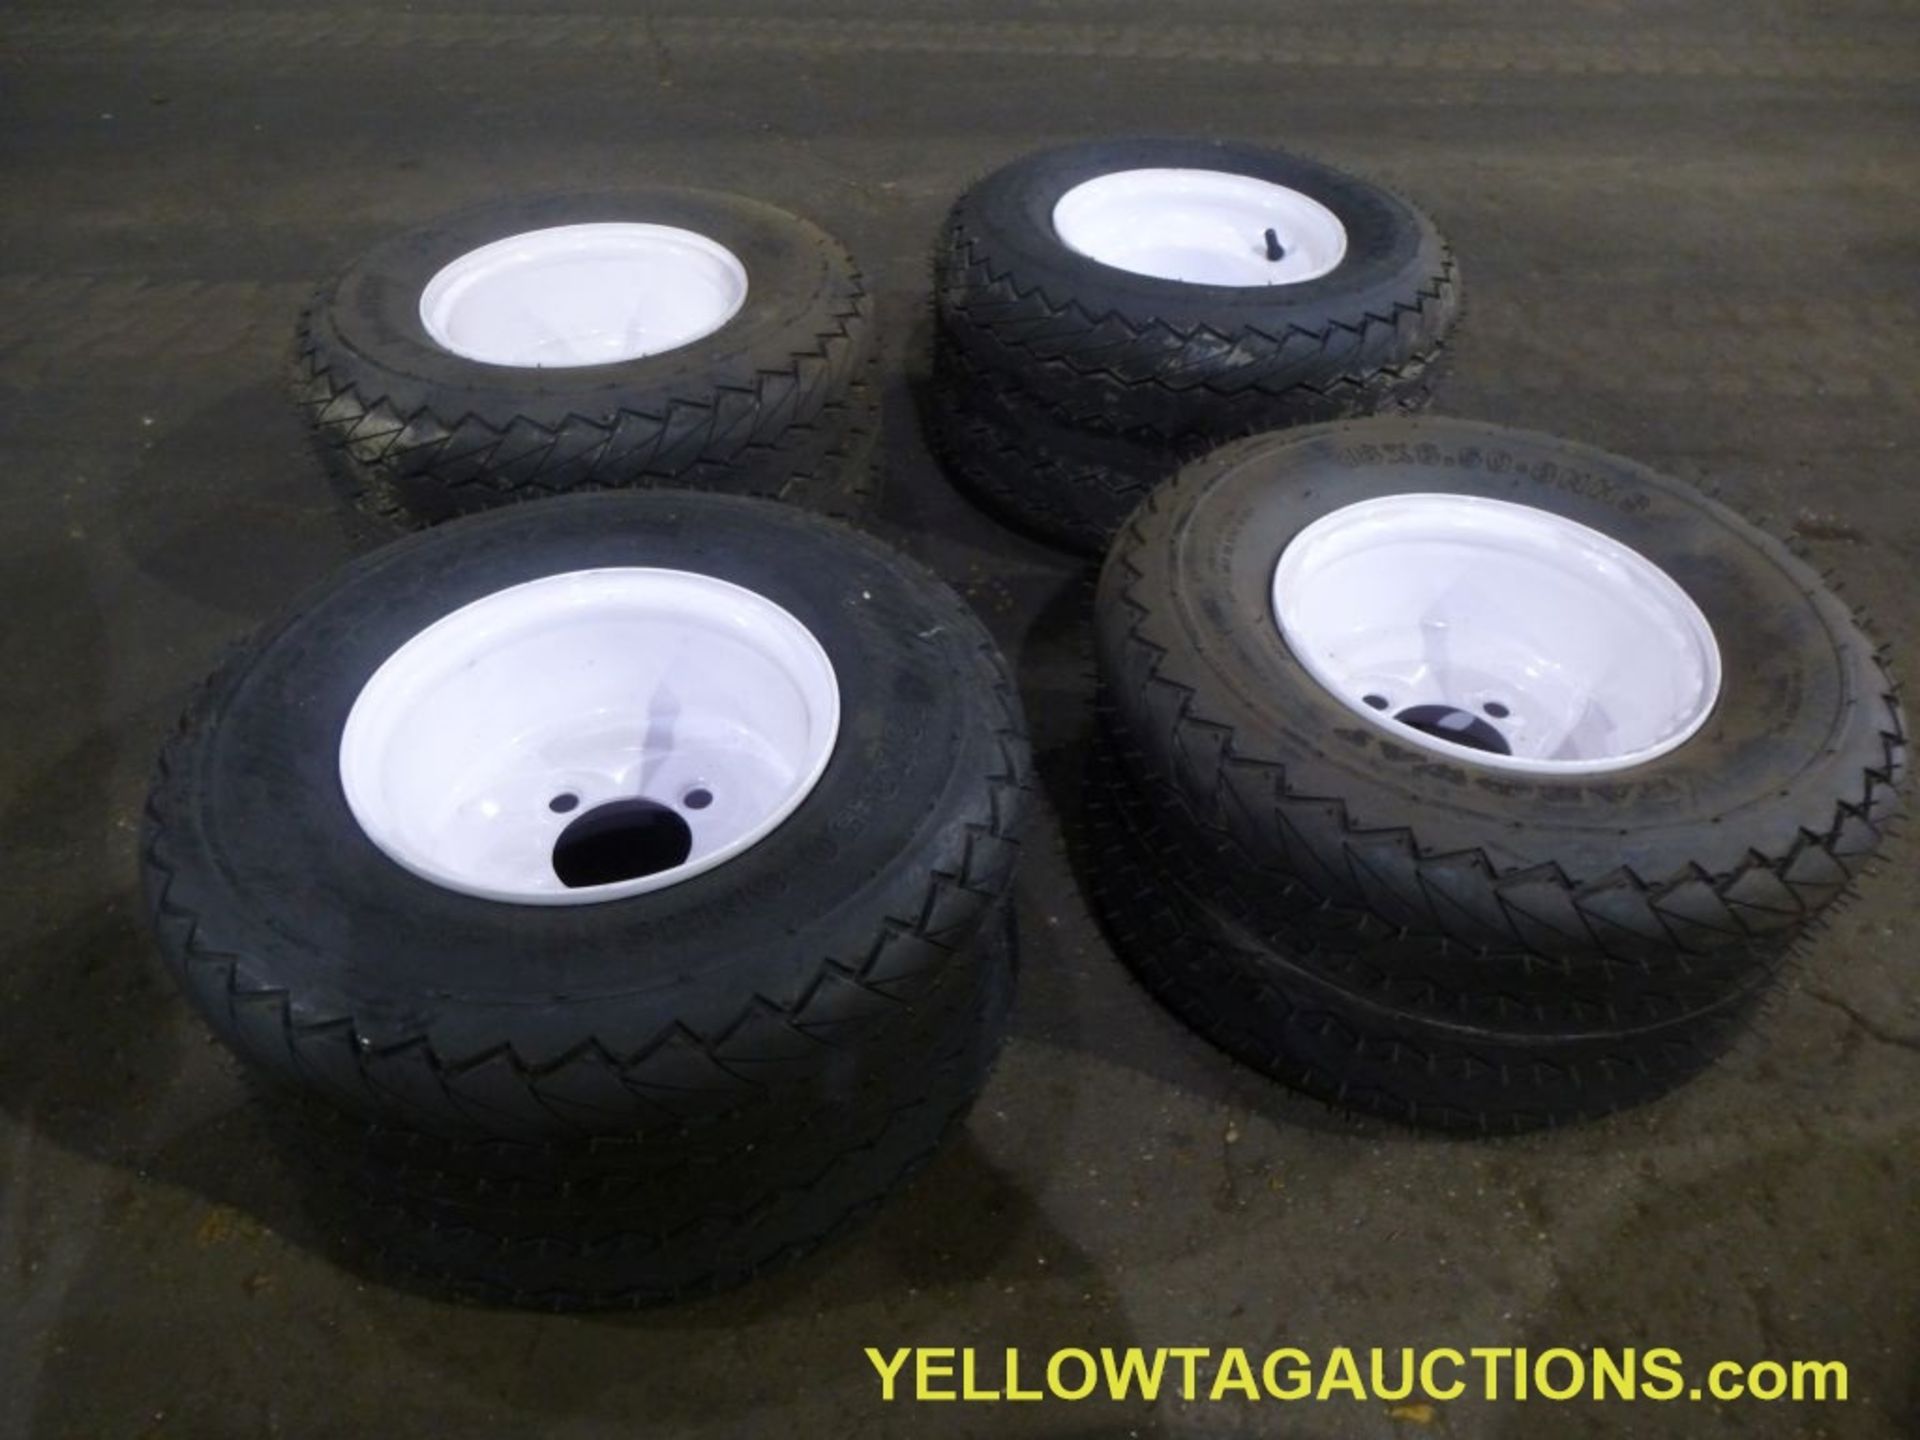 Lot of (12) FarWay 6-Ply Nylon Tires & Wheels|18 X 8.50 - 8NHS|Tag: 439 - Image 2 of 8